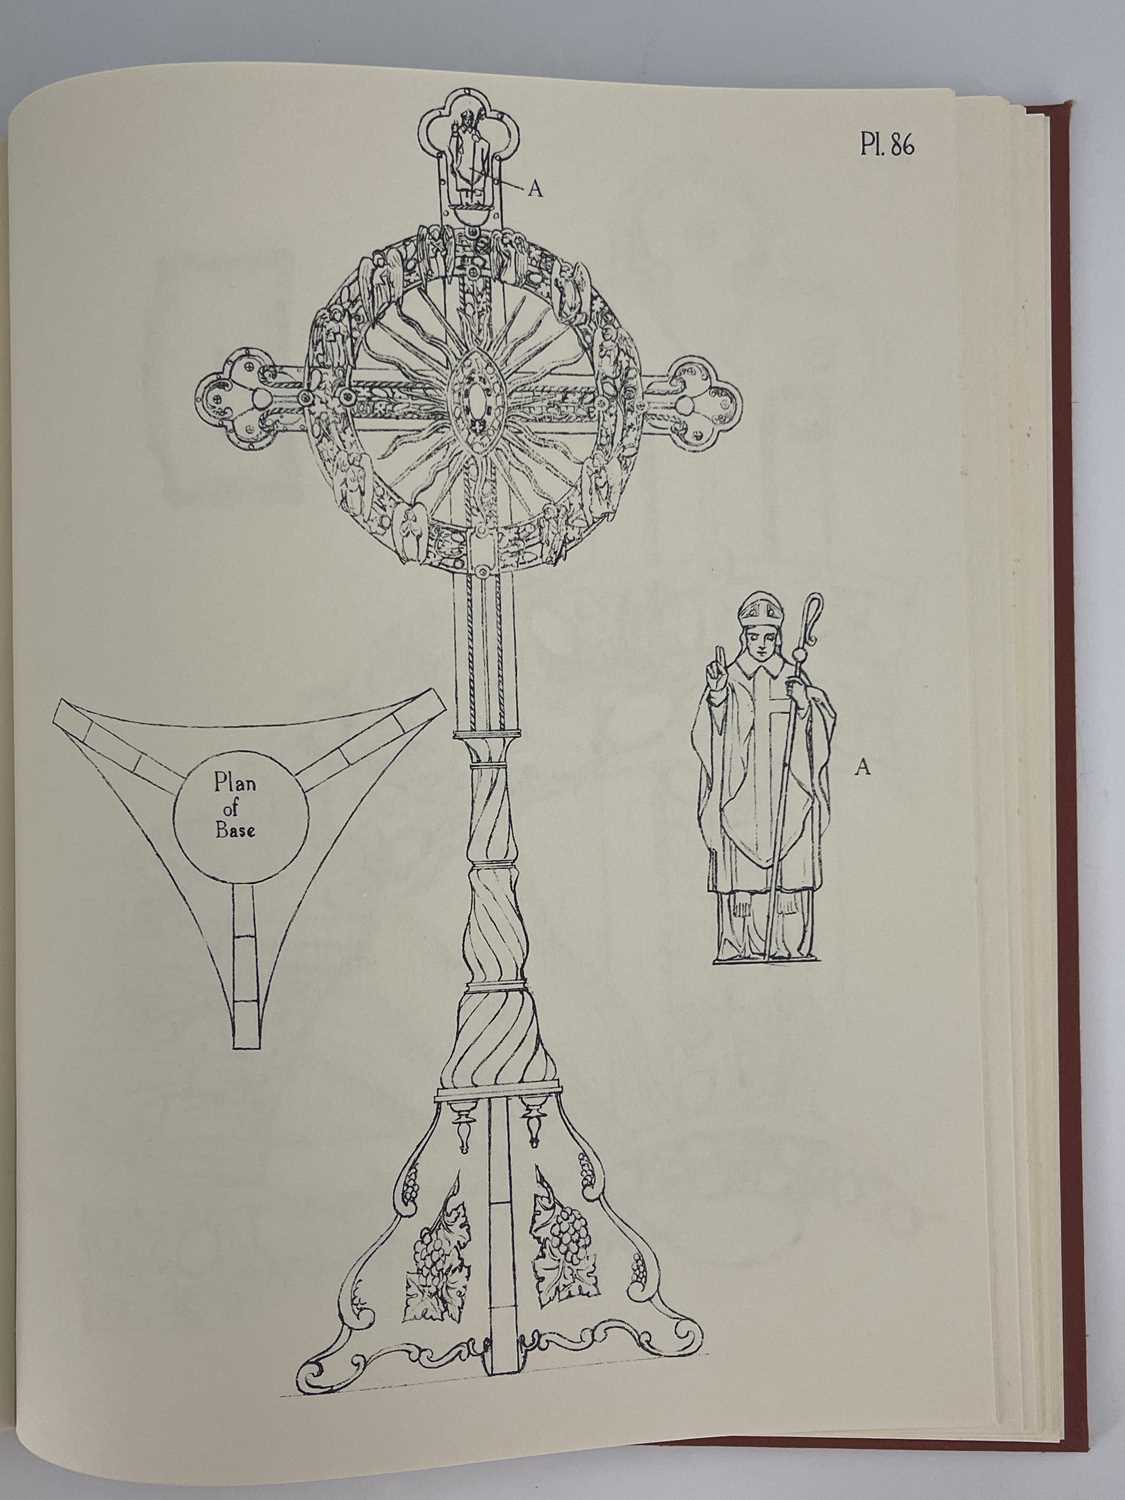 Ashbee, C R, 1909 and 1974, Modern English Silverwork, new edition with facsimile of the original, - Image 2 of 6